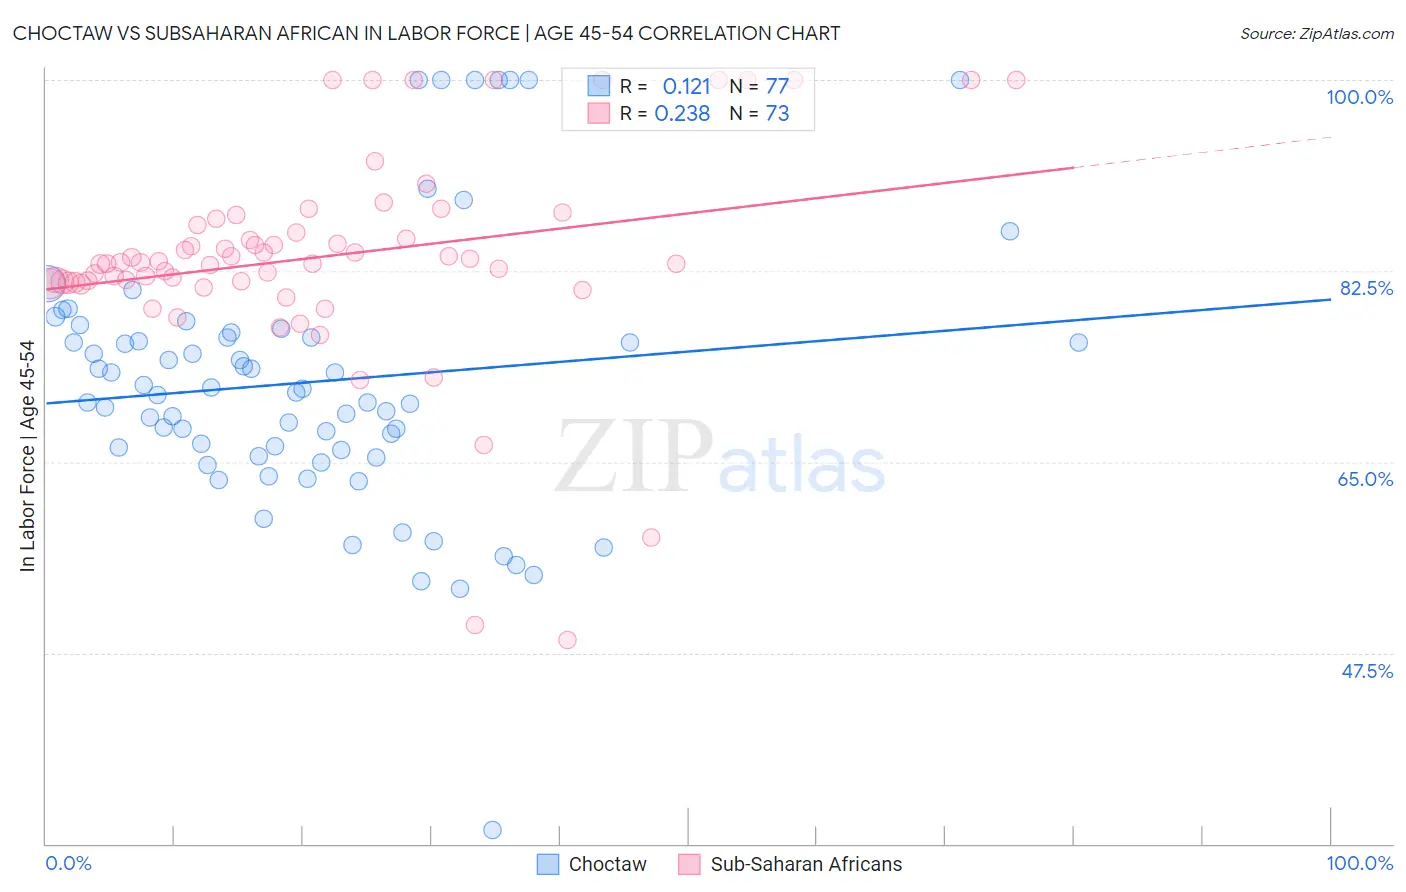 Choctaw vs Subsaharan African In Labor Force | Age 45-54